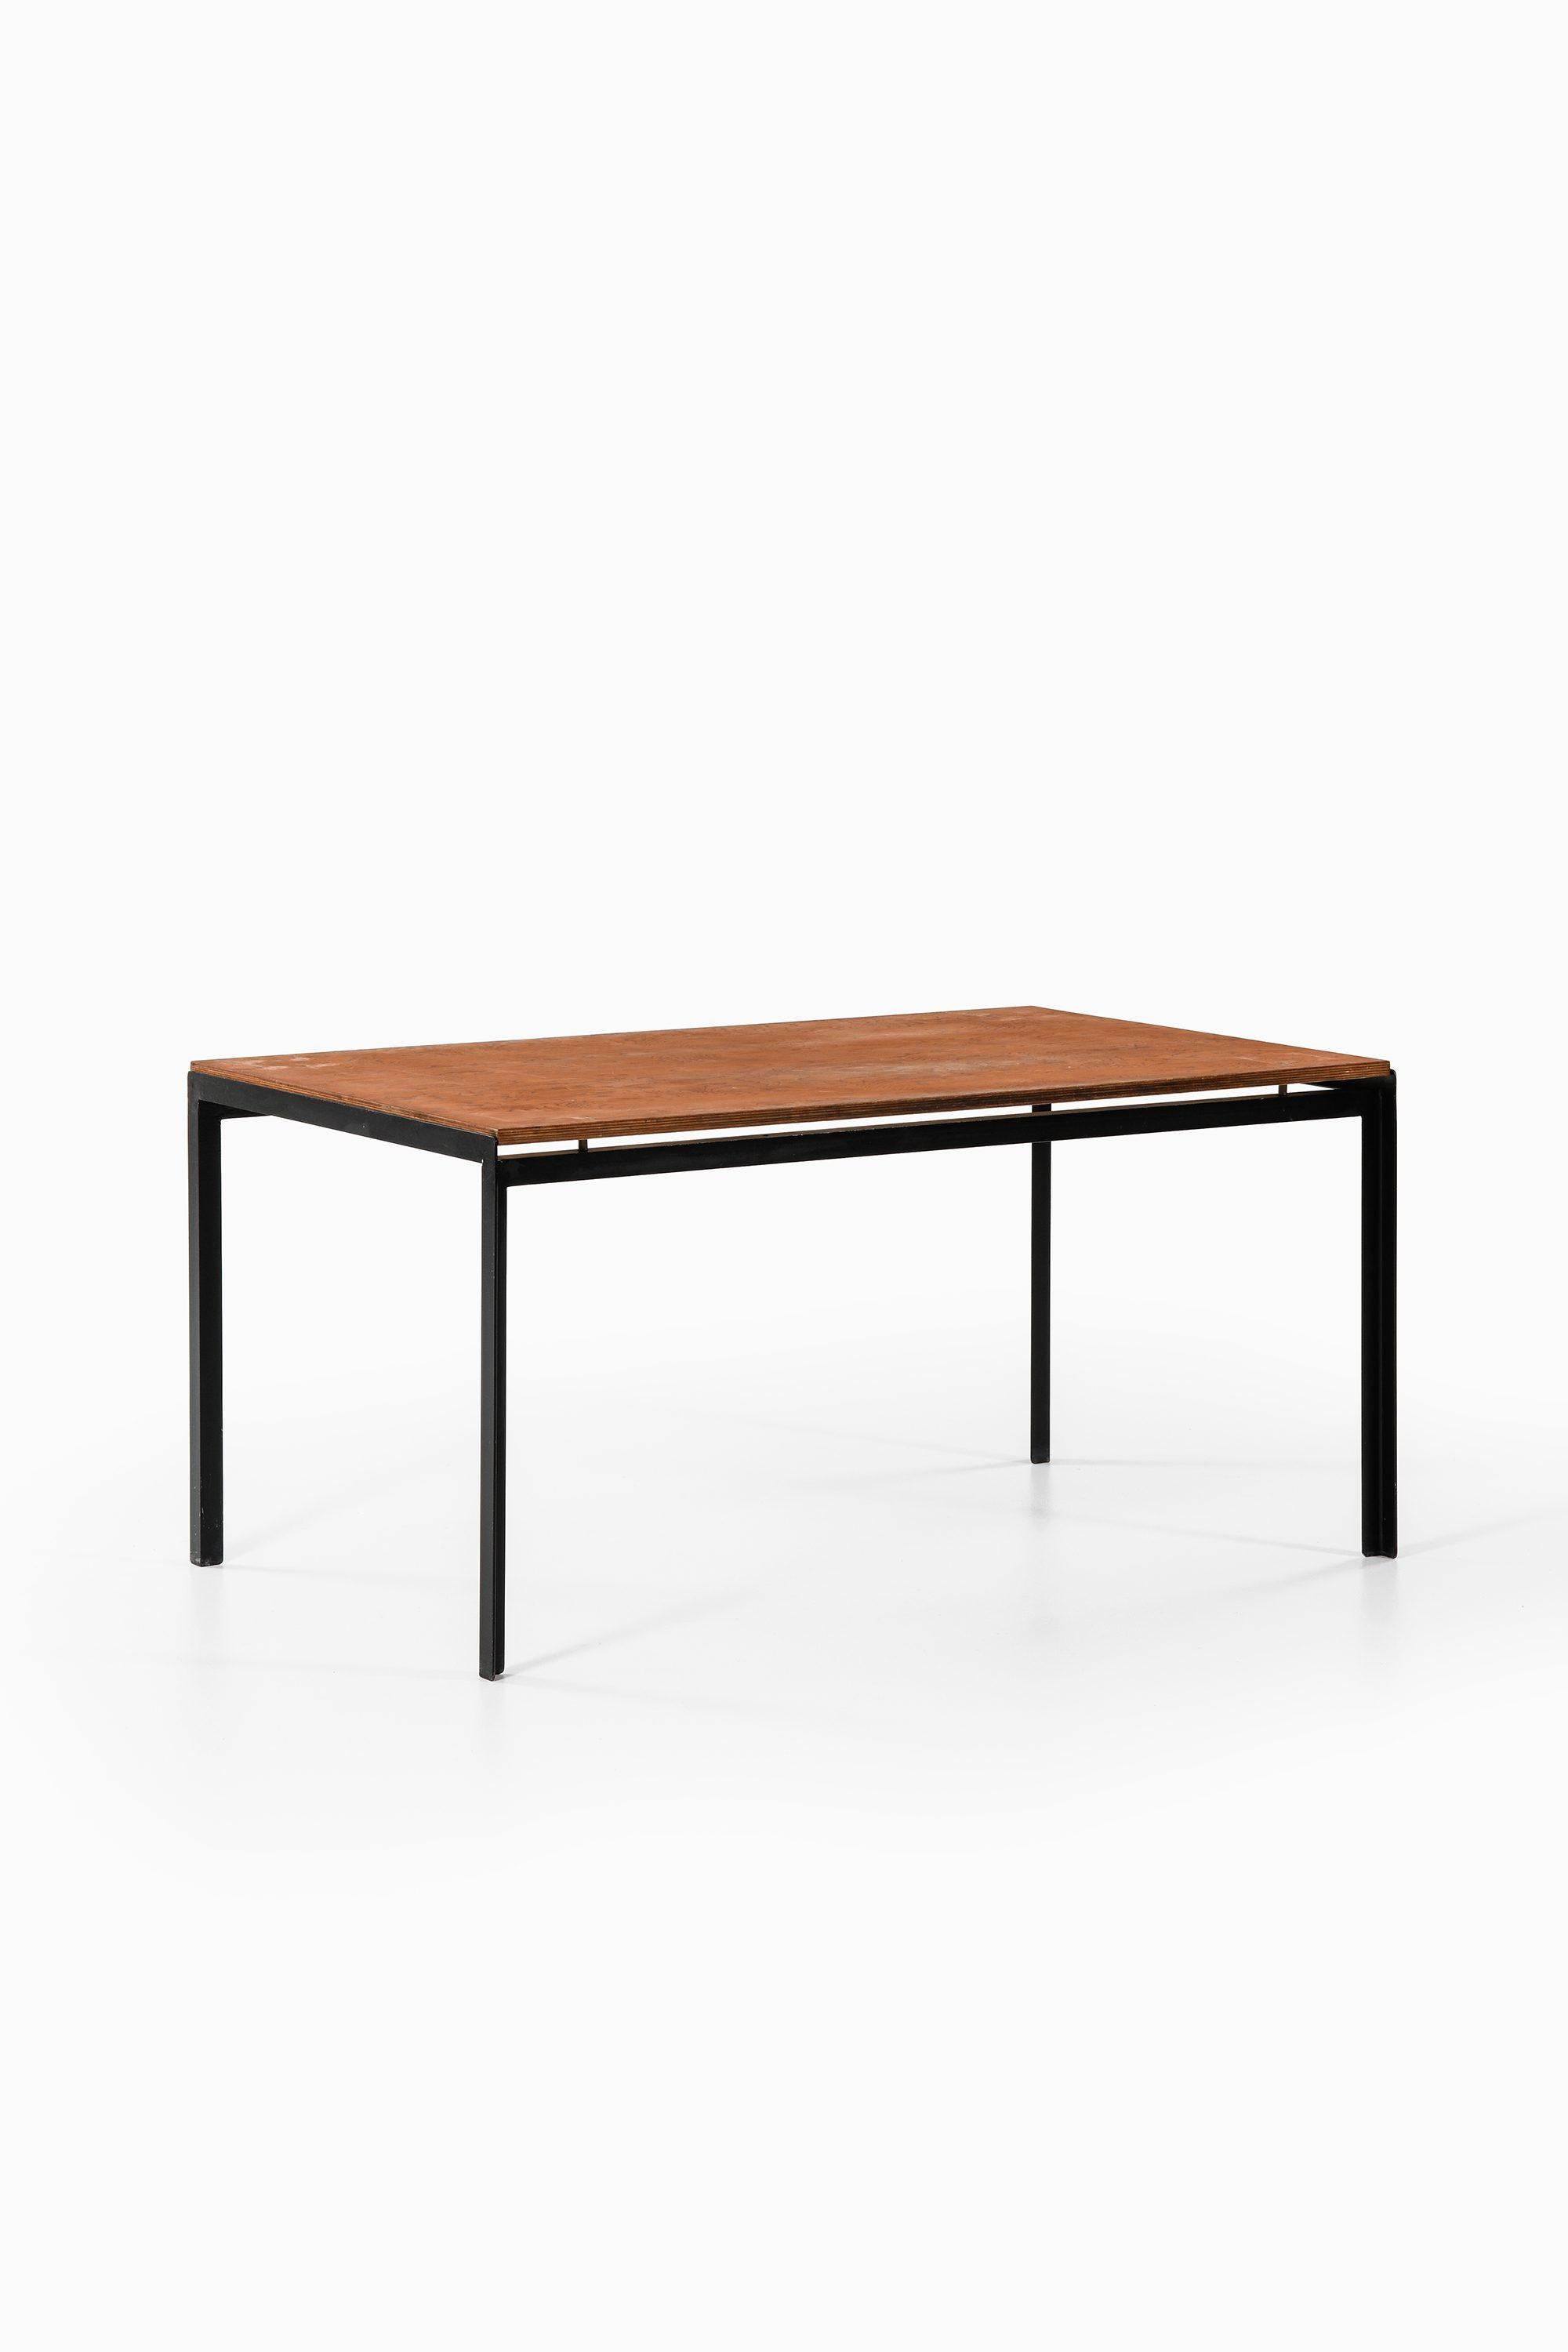 Academy Table in Black Lacquered Steel and Pine by Poul Kjærholm, 1950's

Additional Information:
Material: Black lacquered steel, pine
Style: Mid century, Scandinavia
Produced by Rud. Rasmussen Cabinetmakers in Denmark
Dimensions (W x D x H): 141 x